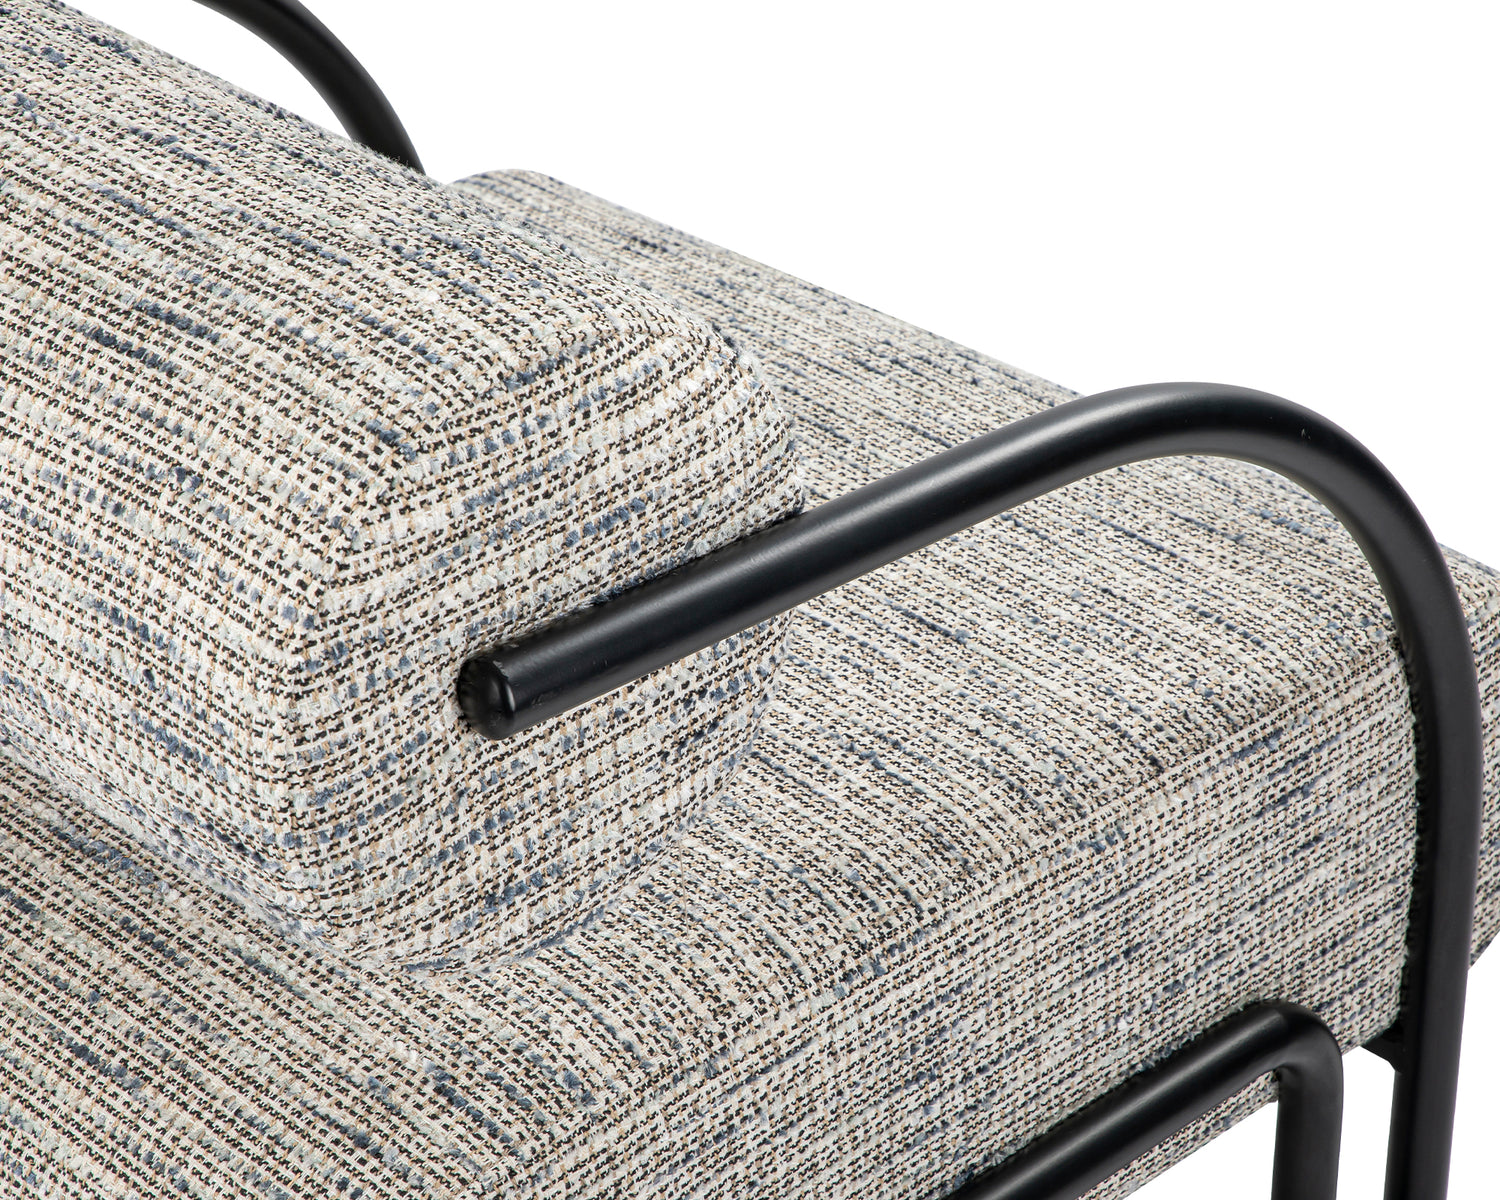 Compo occasional chair – sherpa grey